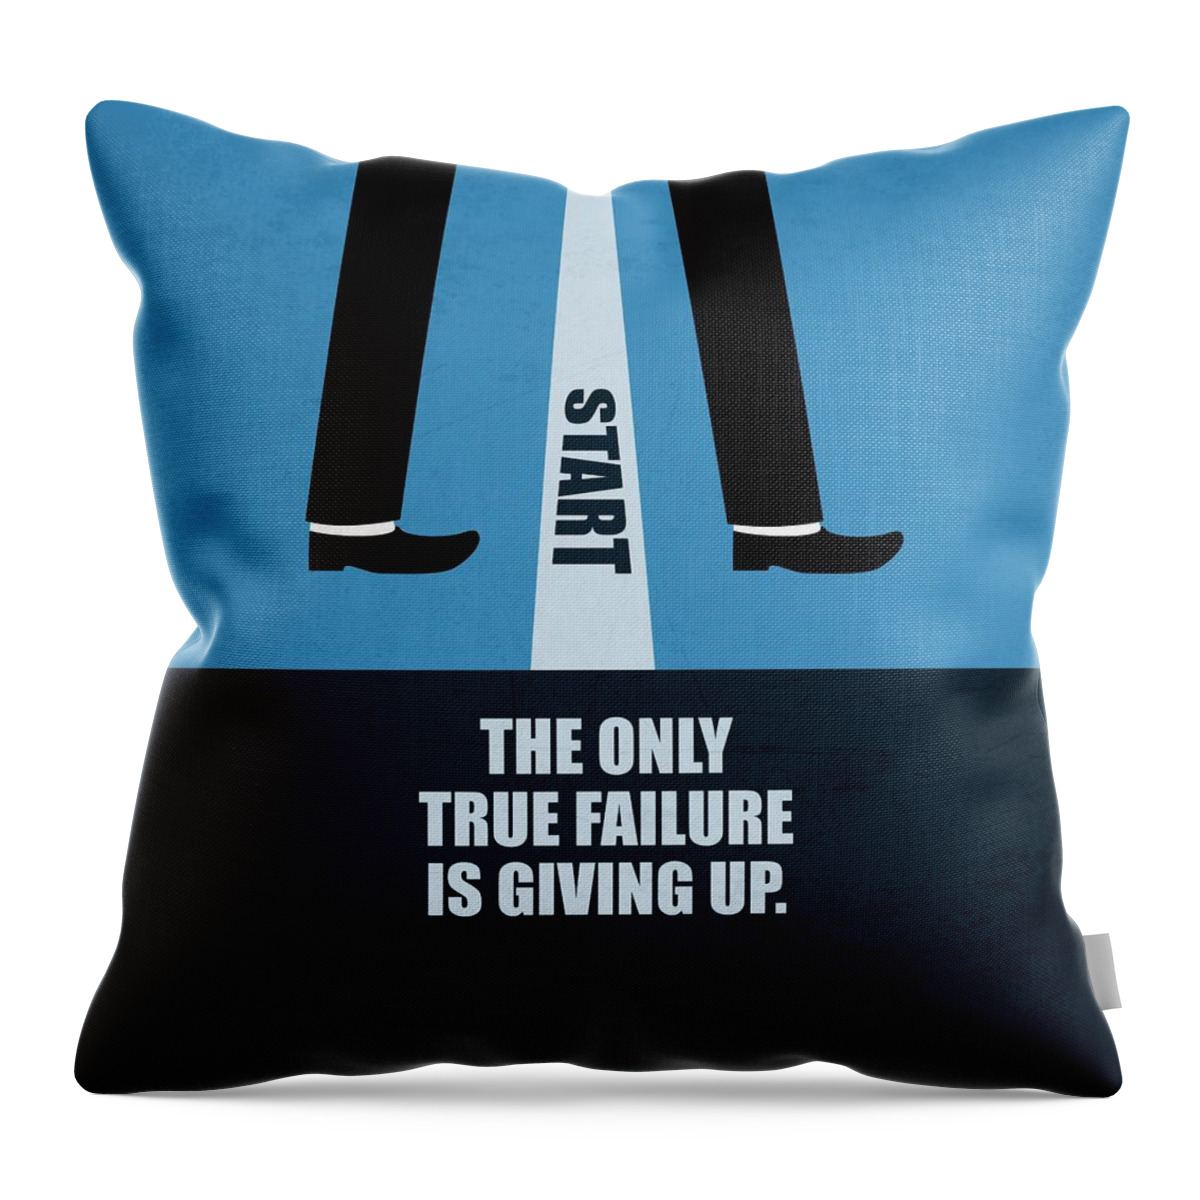 Corporate Throw Pillow featuring the digital art The Only True Failure Is Giving UpCorporate Start-up Quotes poster by Lab No 4